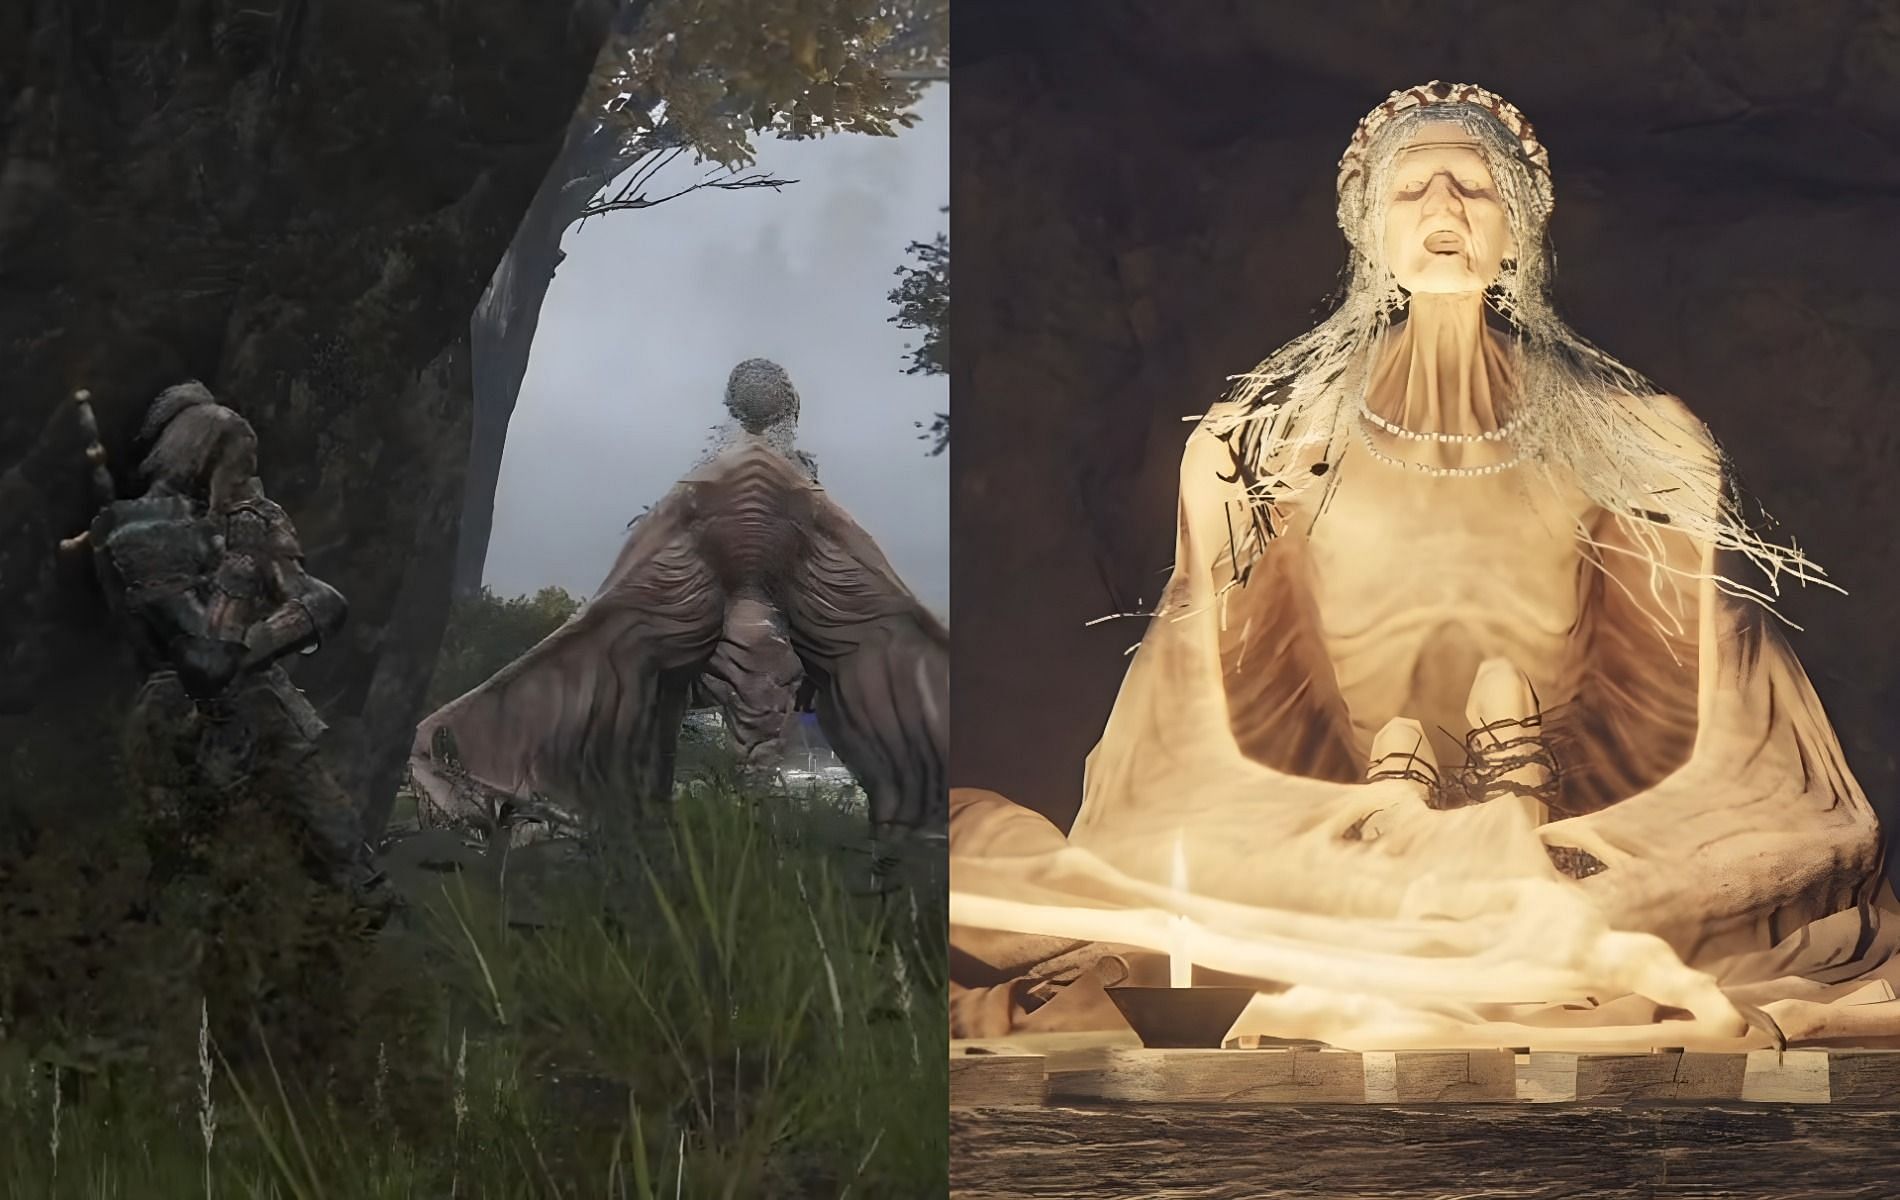 The songs of the Chanting Winged Dames add more interesting lore insight to Elden Ring (Images via Elden Ring and Tabetha/YouTube)